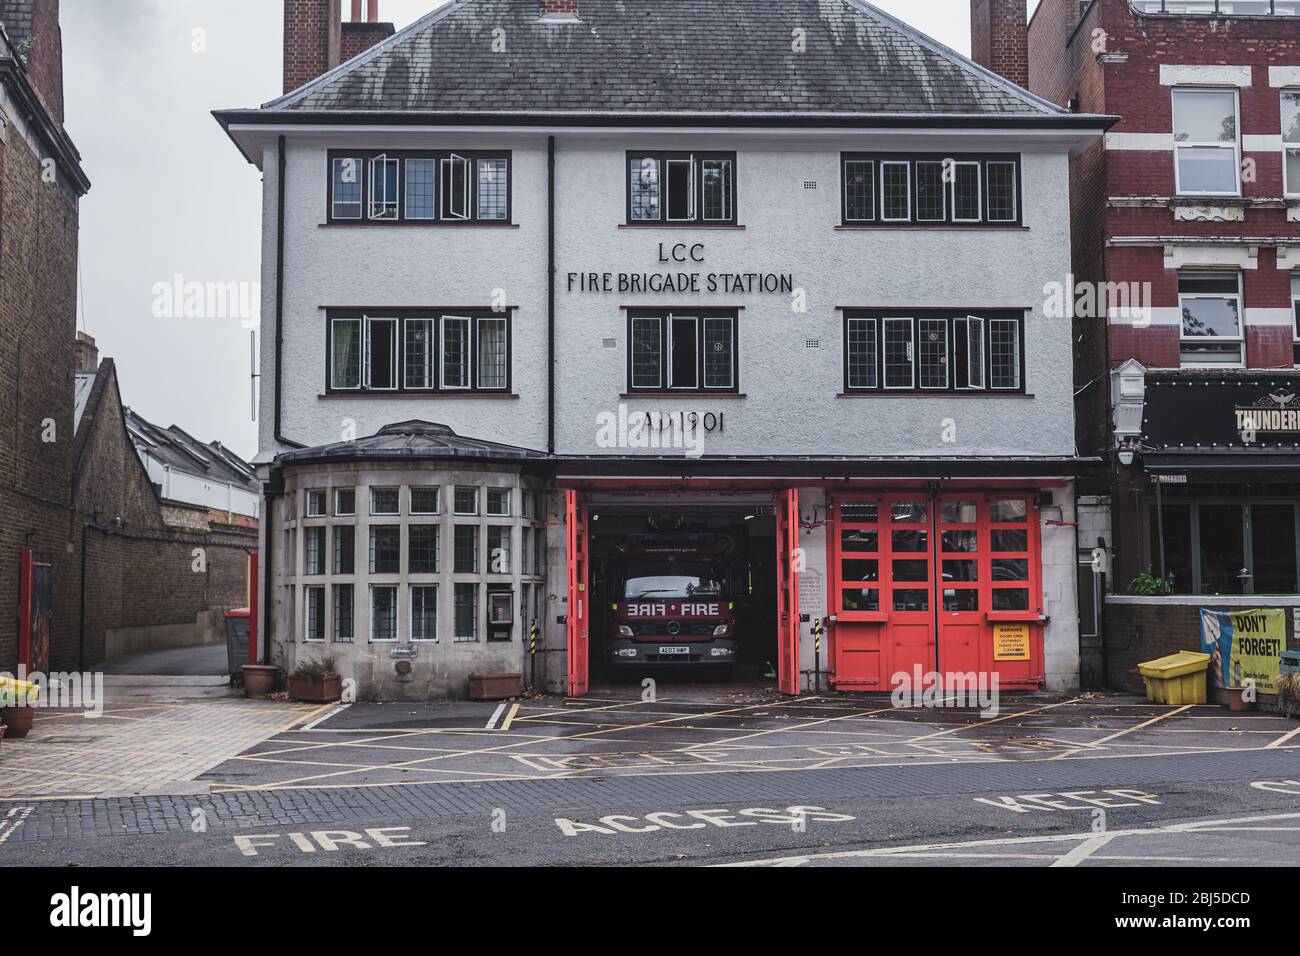 London/UK-30/07/18: West Hampstead Fire Brigade Station on West End Lane. Fire Station is a structure for storing firefighting equipment like fire eng Stock Photo